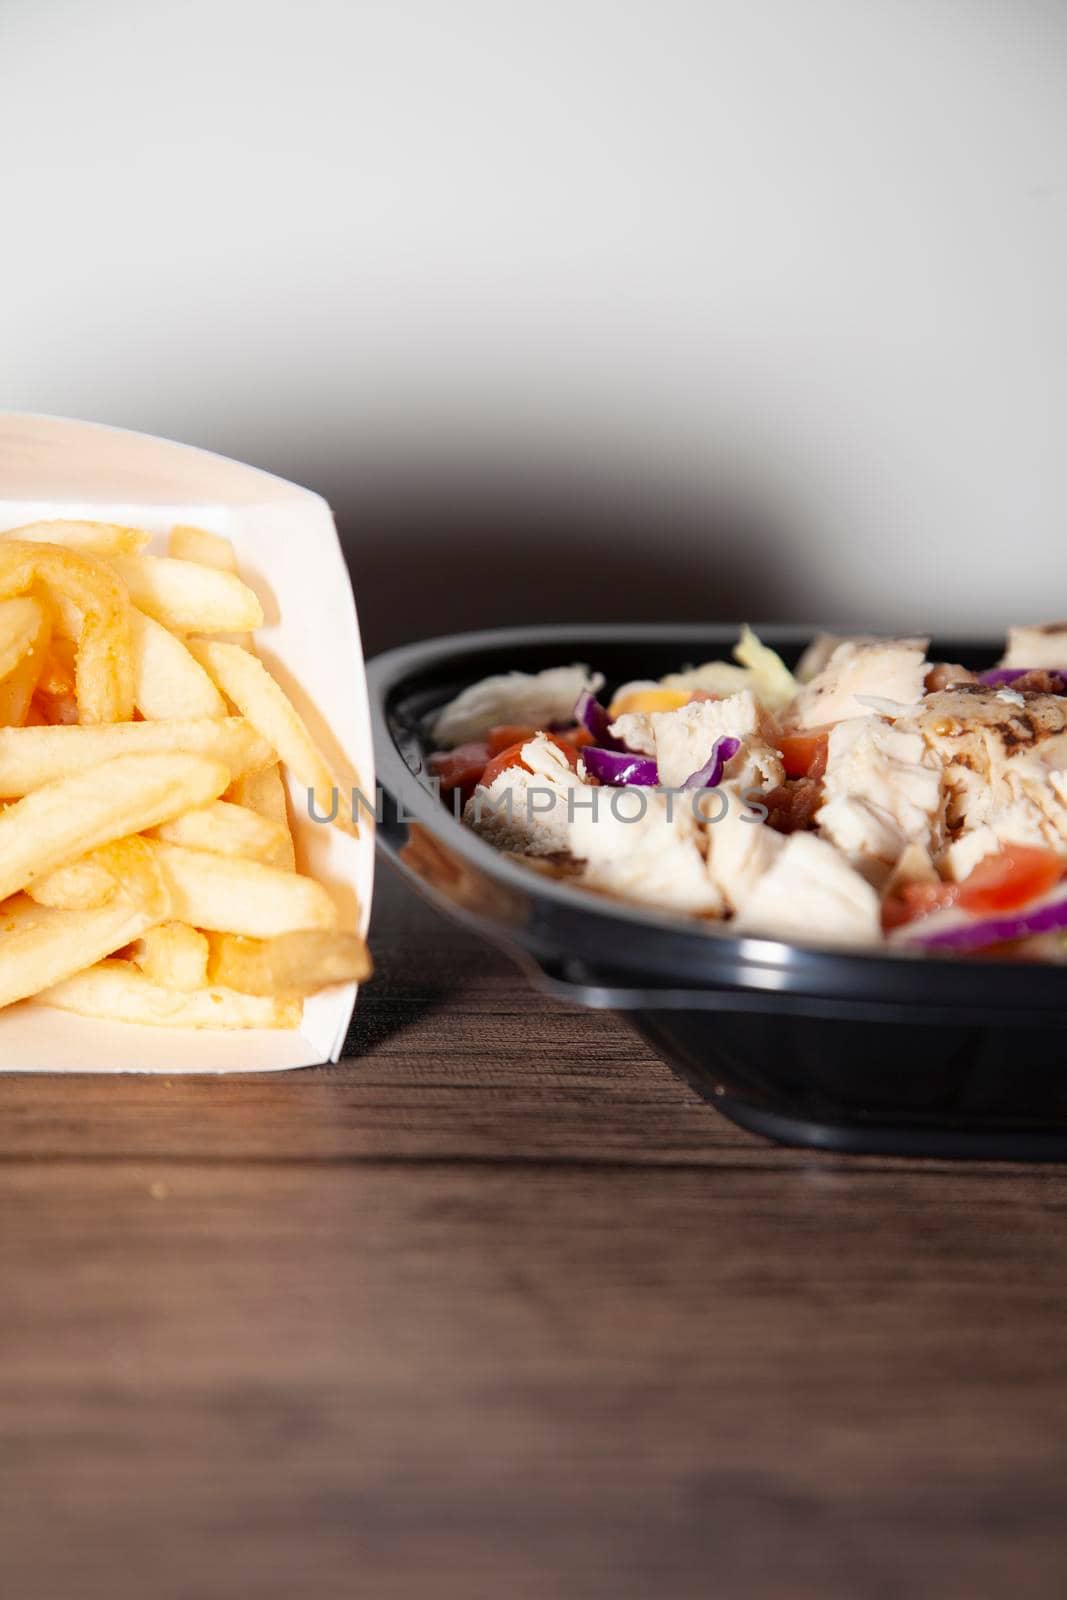 French fries next to grilled chicken, bacon, lettuce, cabbage, shredded cheese, and diced tomato salad in a takeout container